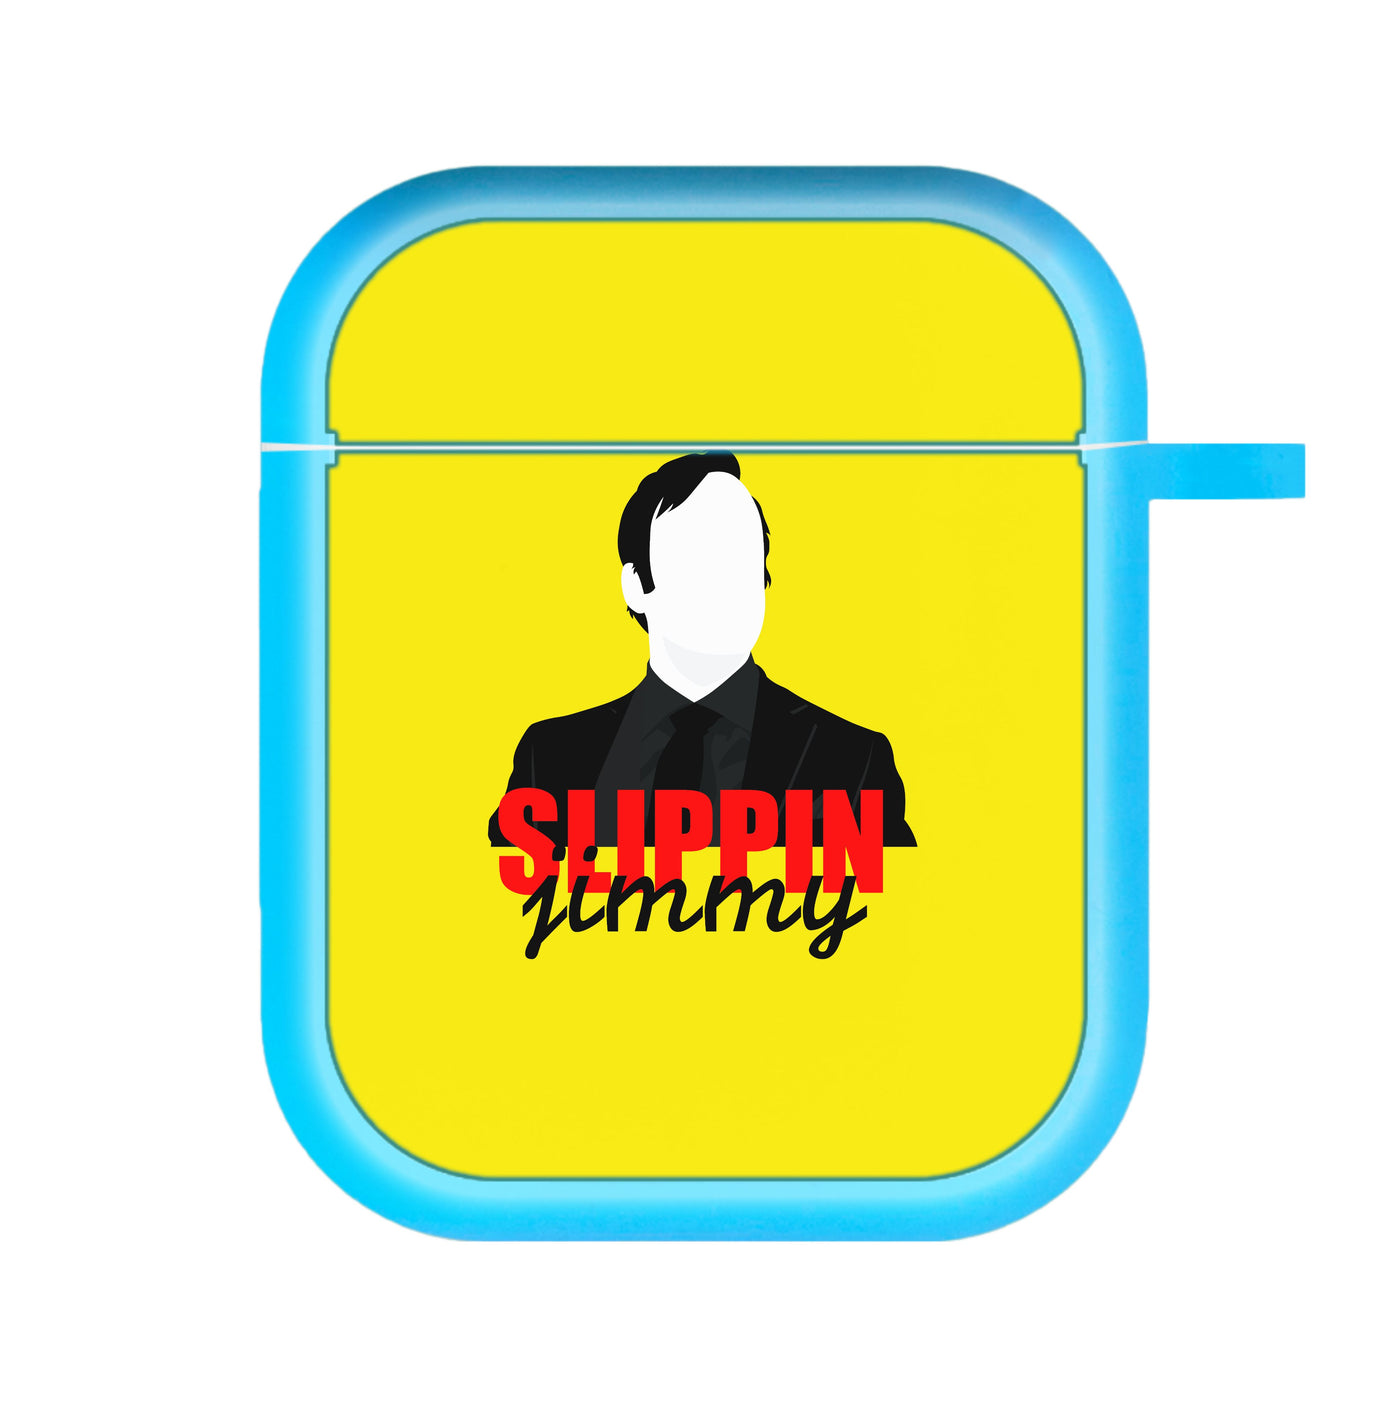 Saul Jimmy - Better Call Saul AirPods Case